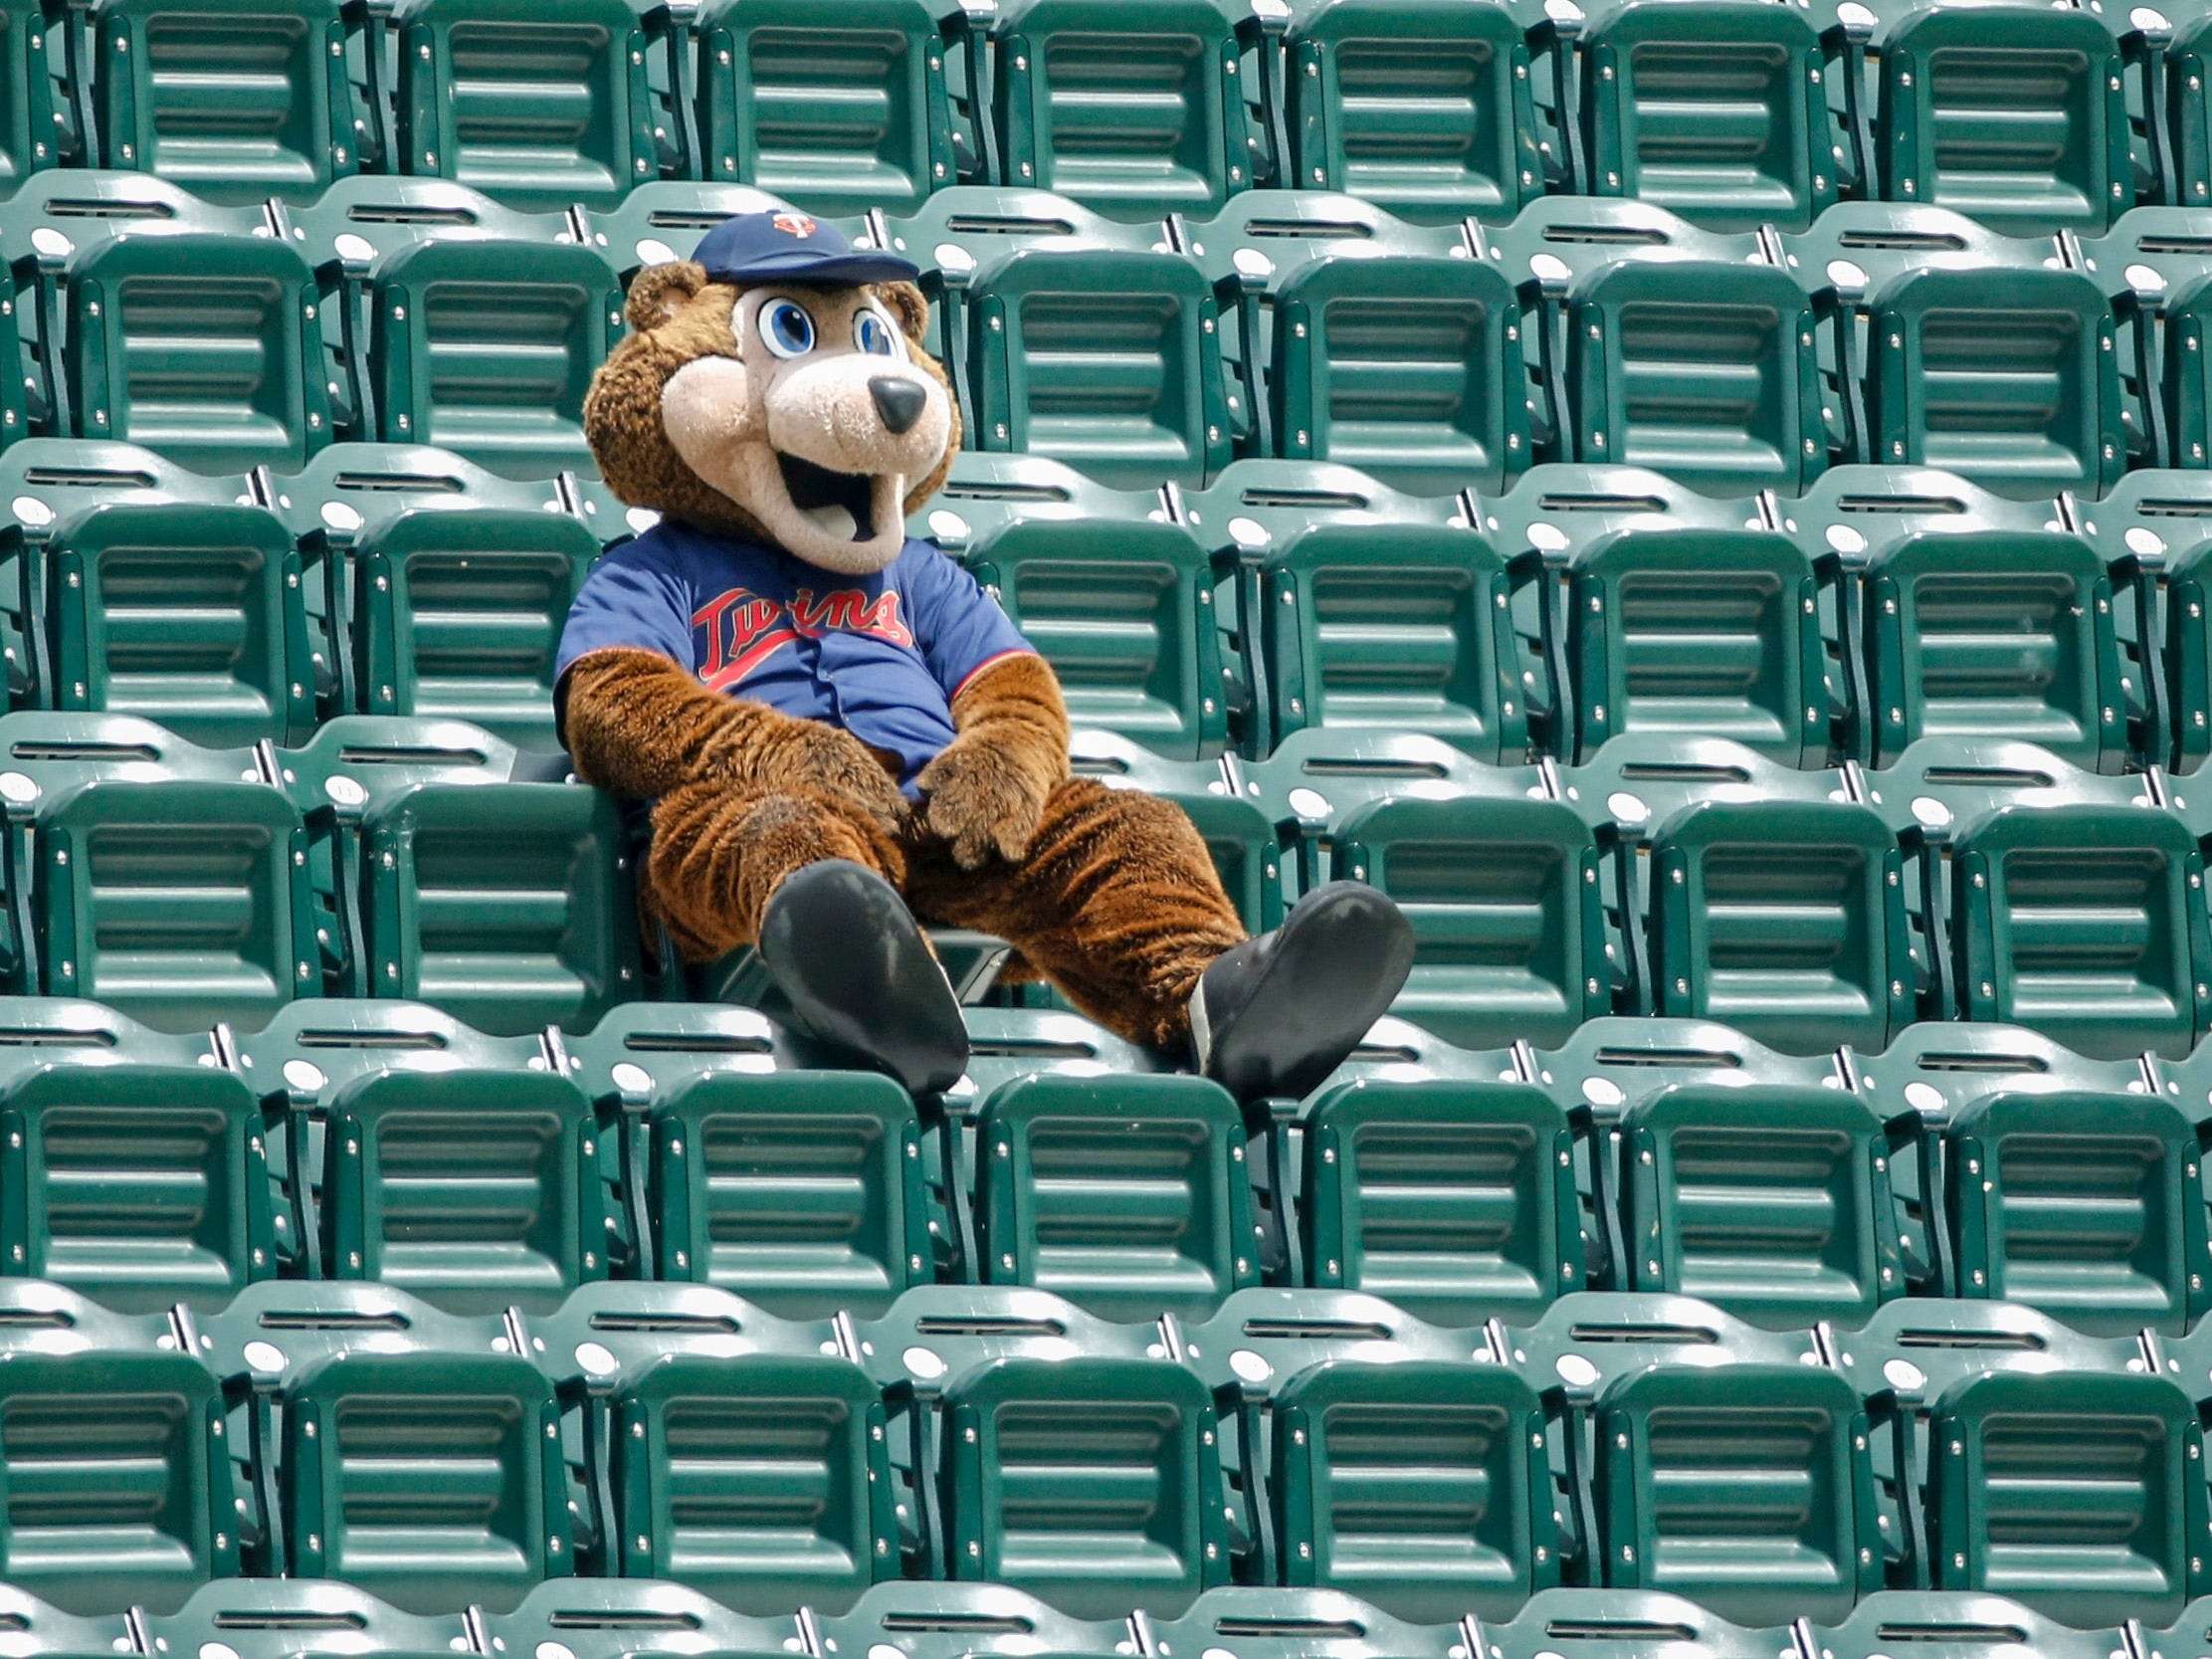 Can't 'bear' it: Jazz mascot ranked among worst in NBA?